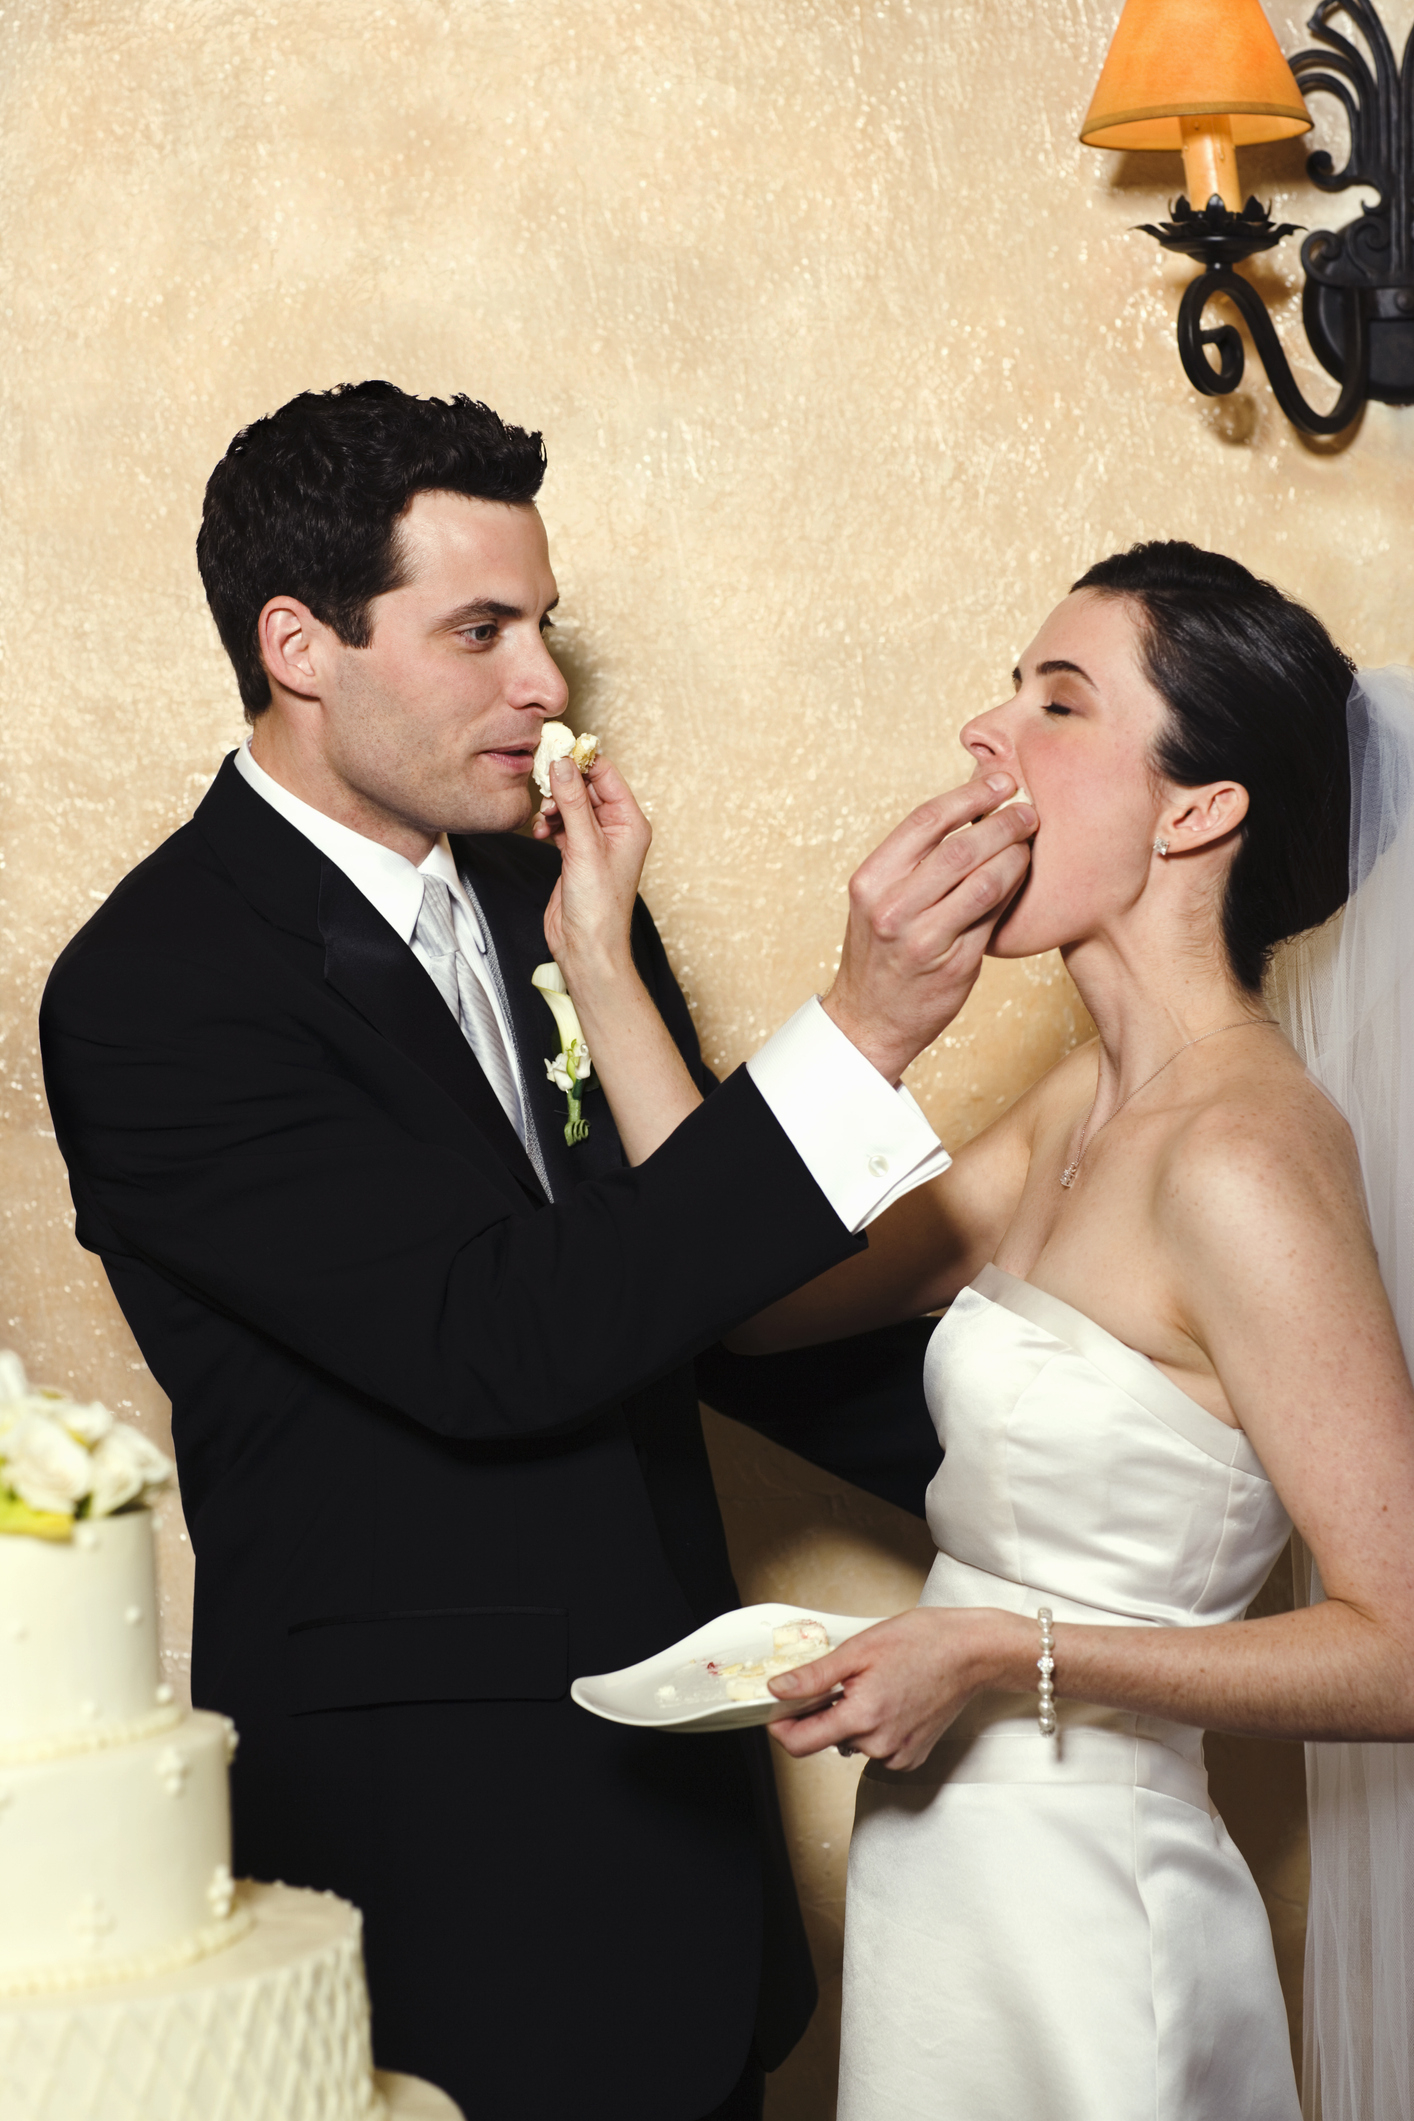 Bride in a white dress and groom in a black suit feeding each other cake at their wedding